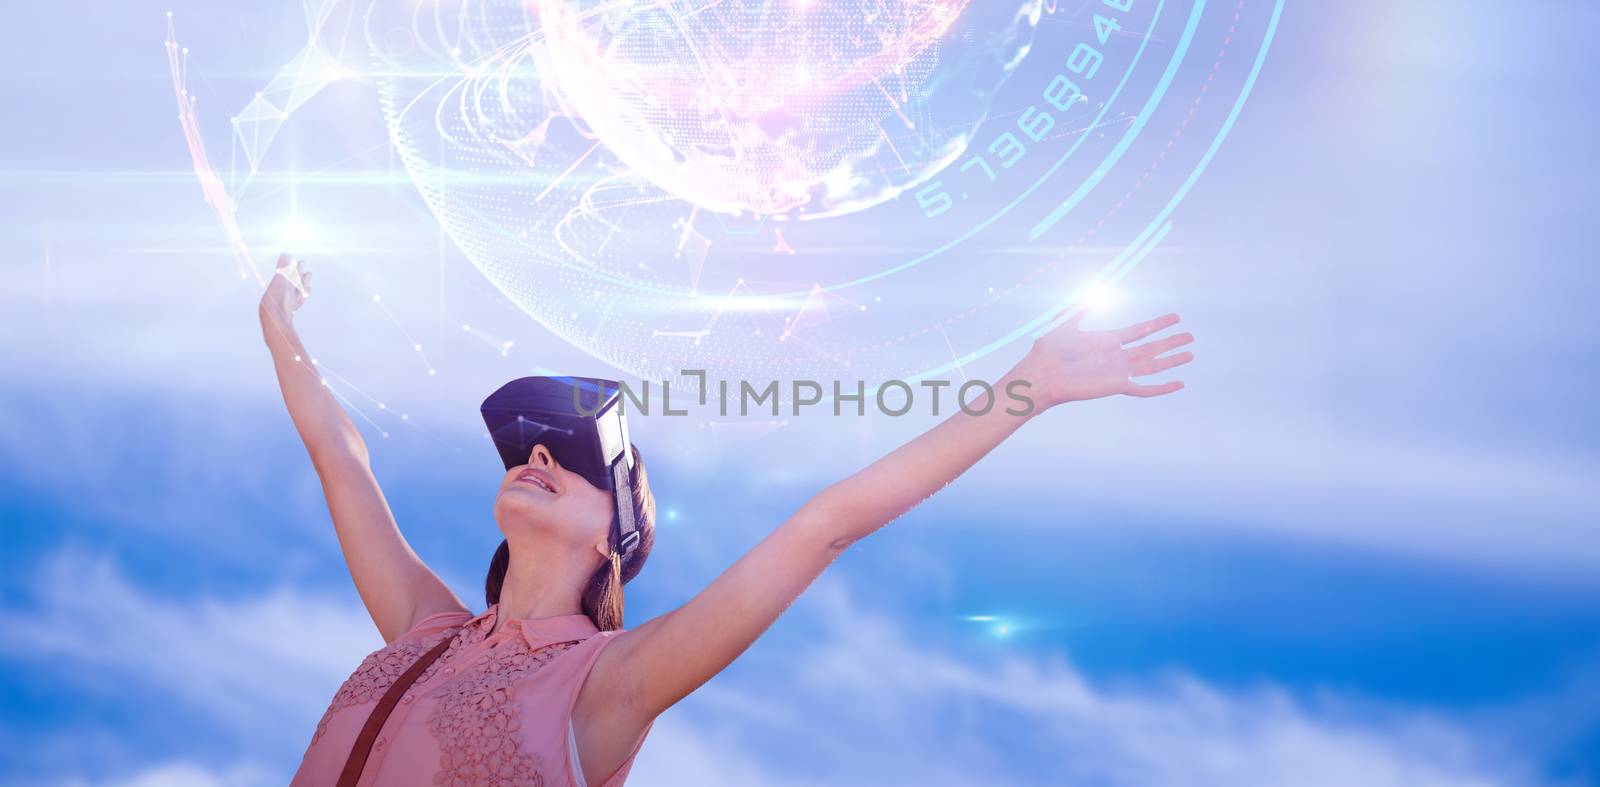 Woman with arms raised looking through virtual reality simulator against white background against global technology background in blue